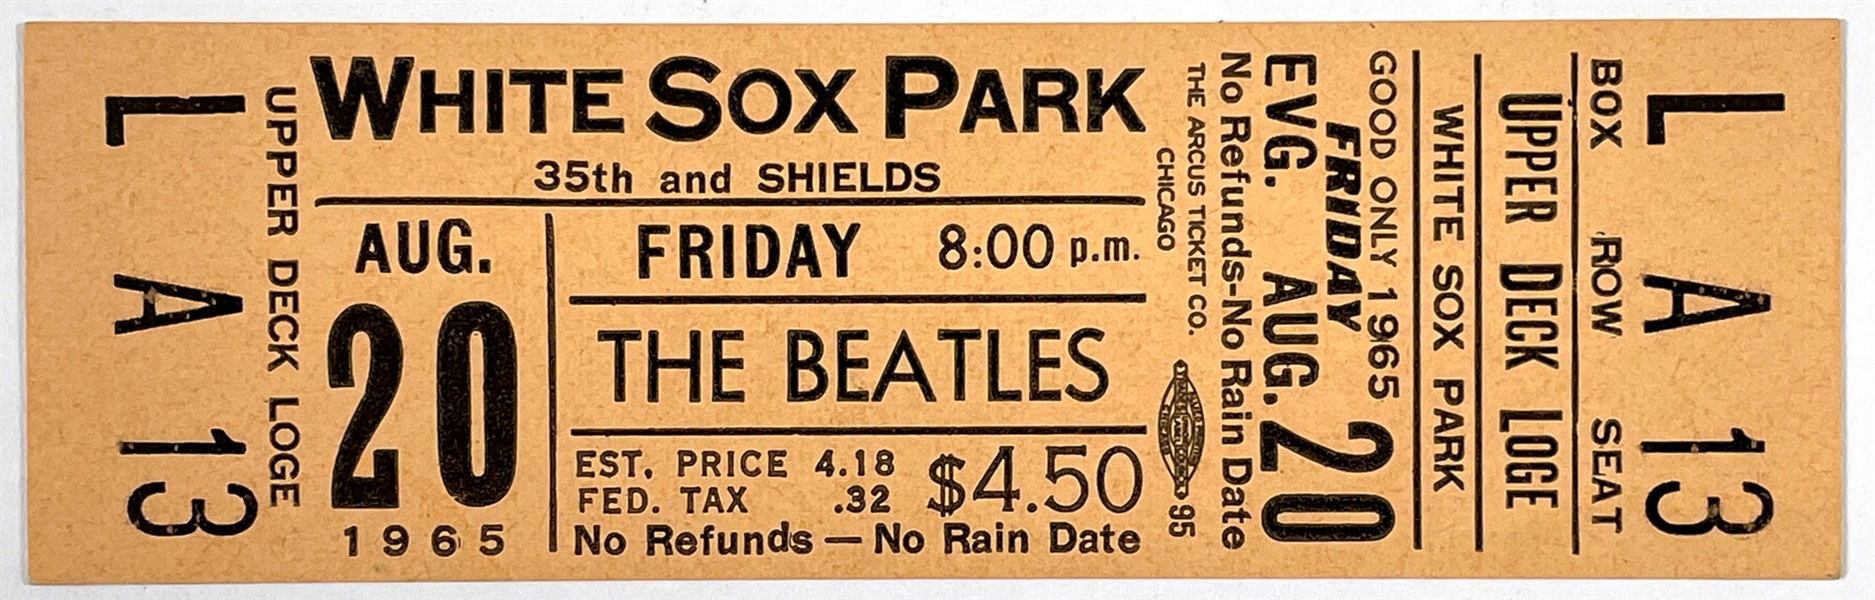 Gorgeous 1965 FULL Ticket for Beatles August 20, 1965 Concert at White Sox Park